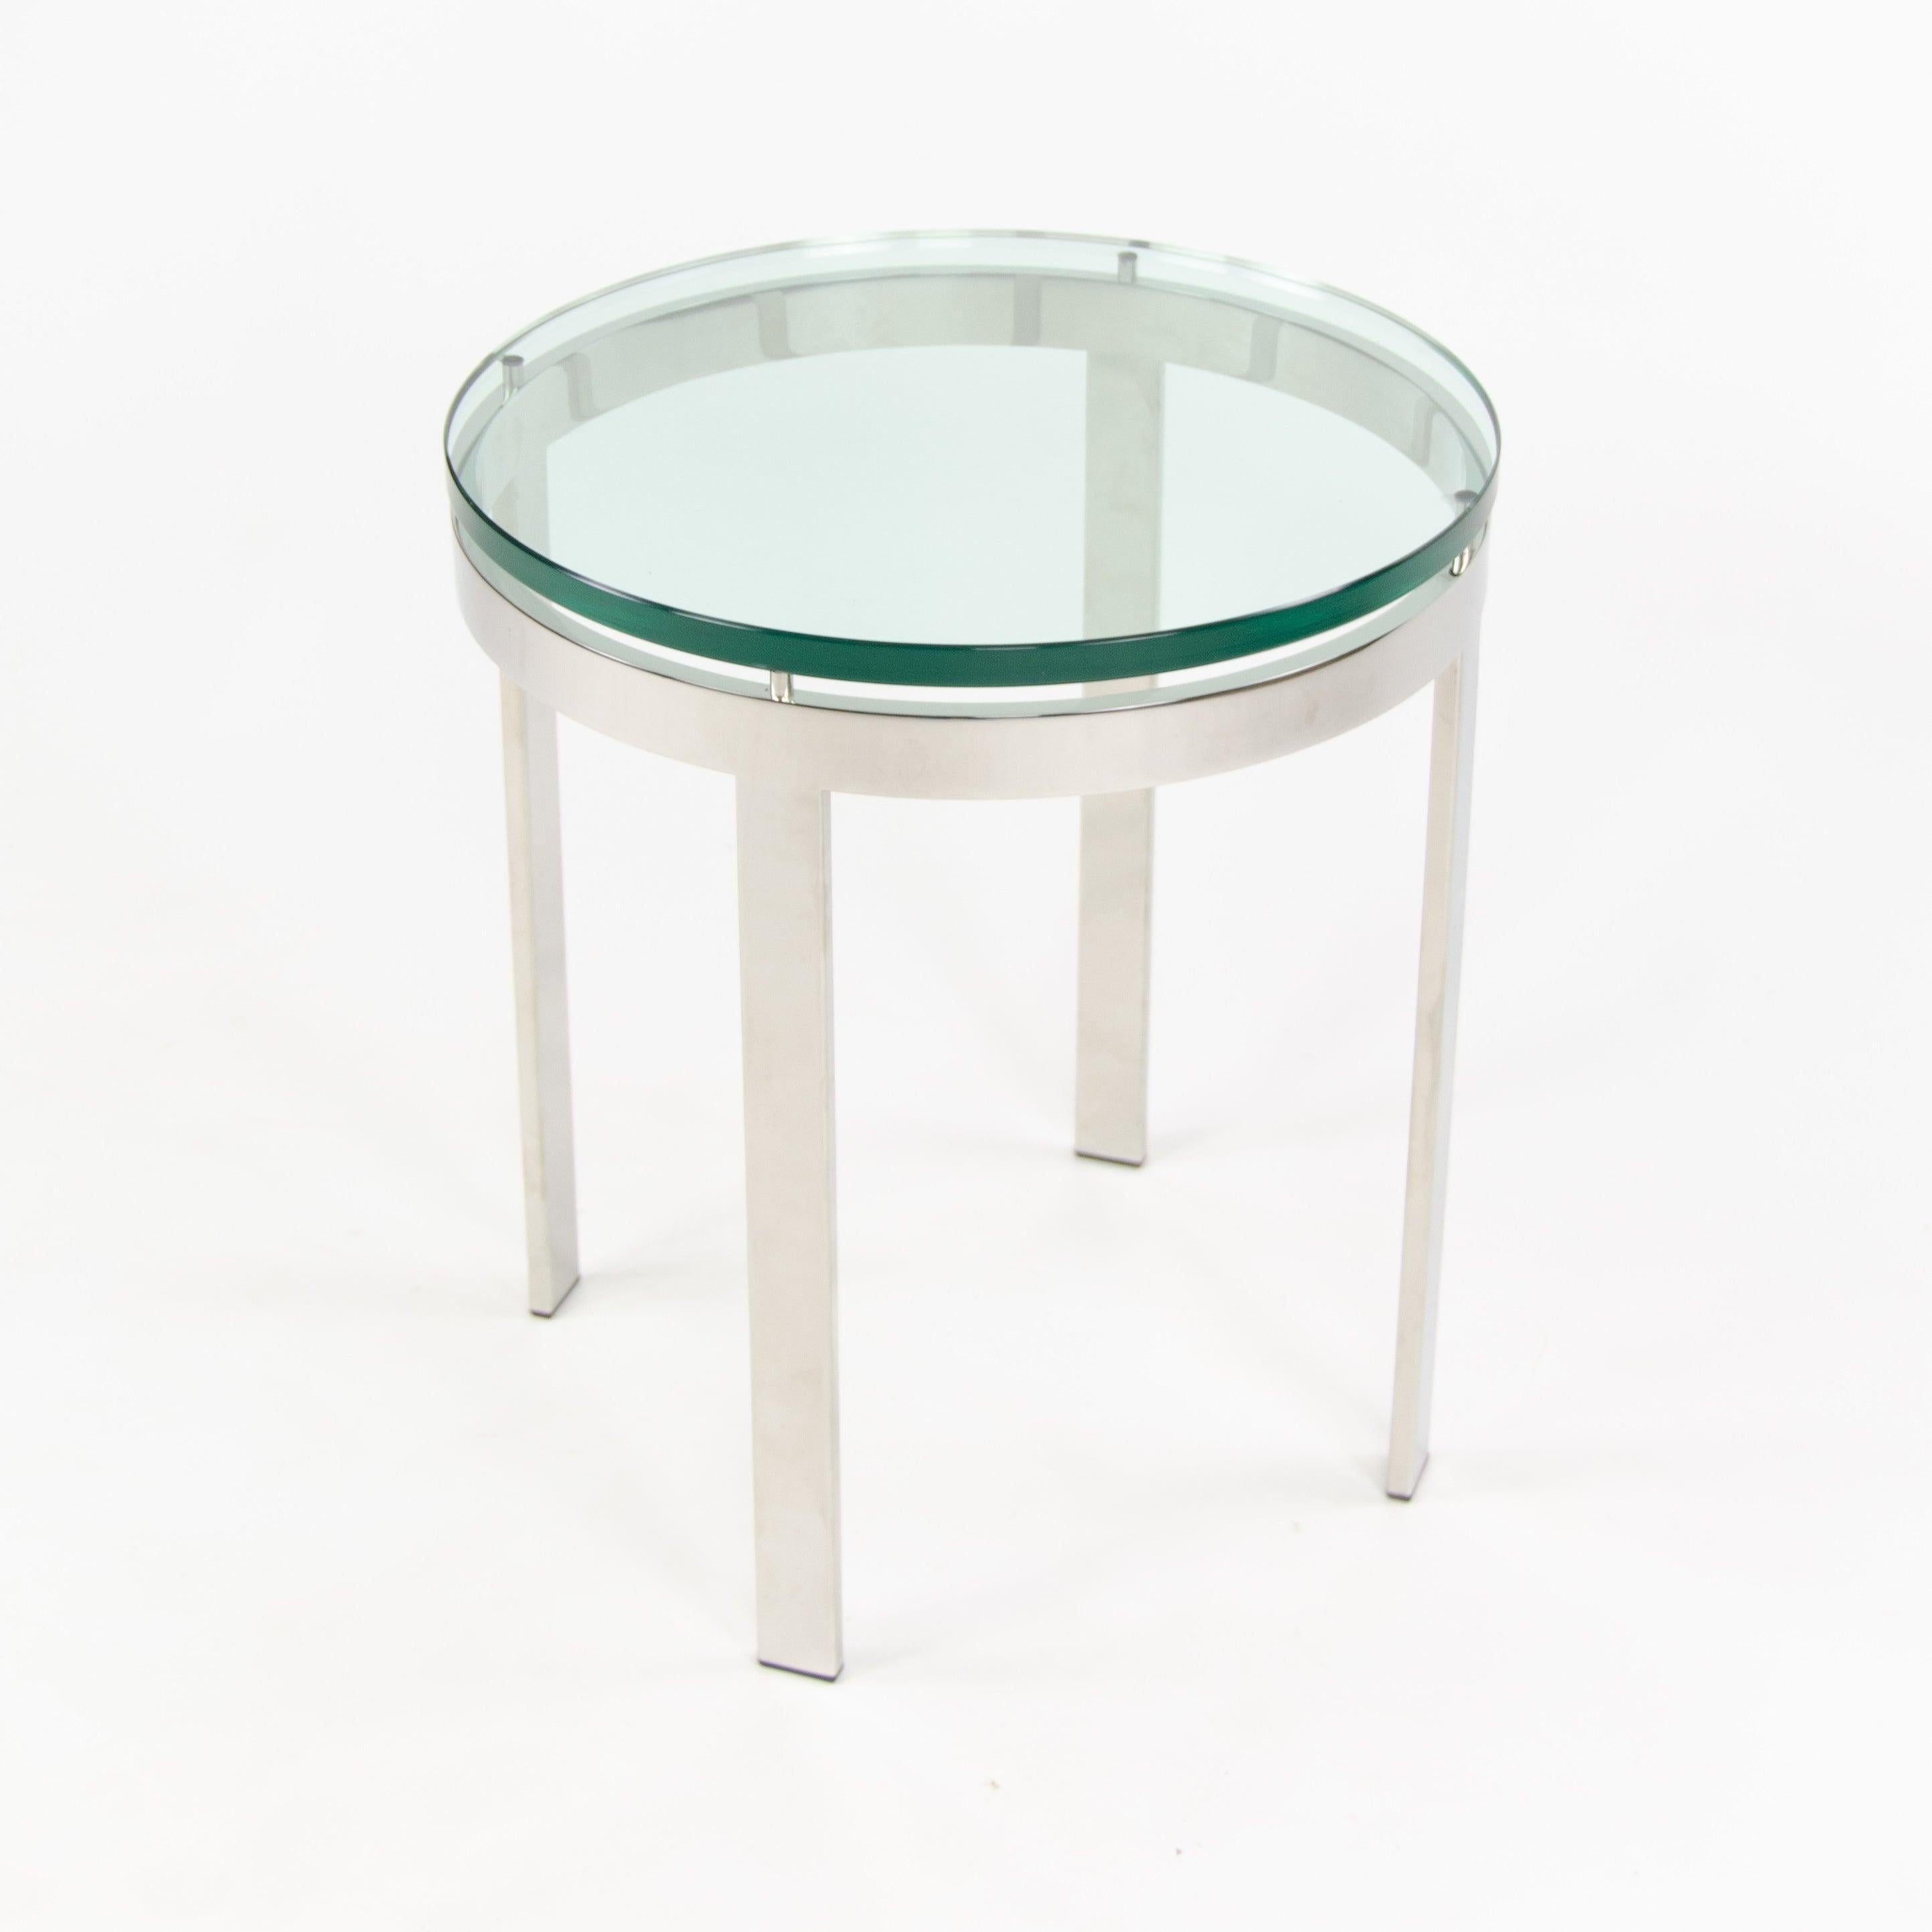 Nicos Zographos Designs Limited Glass Stainless Side Table from SOM Project For Sale 1